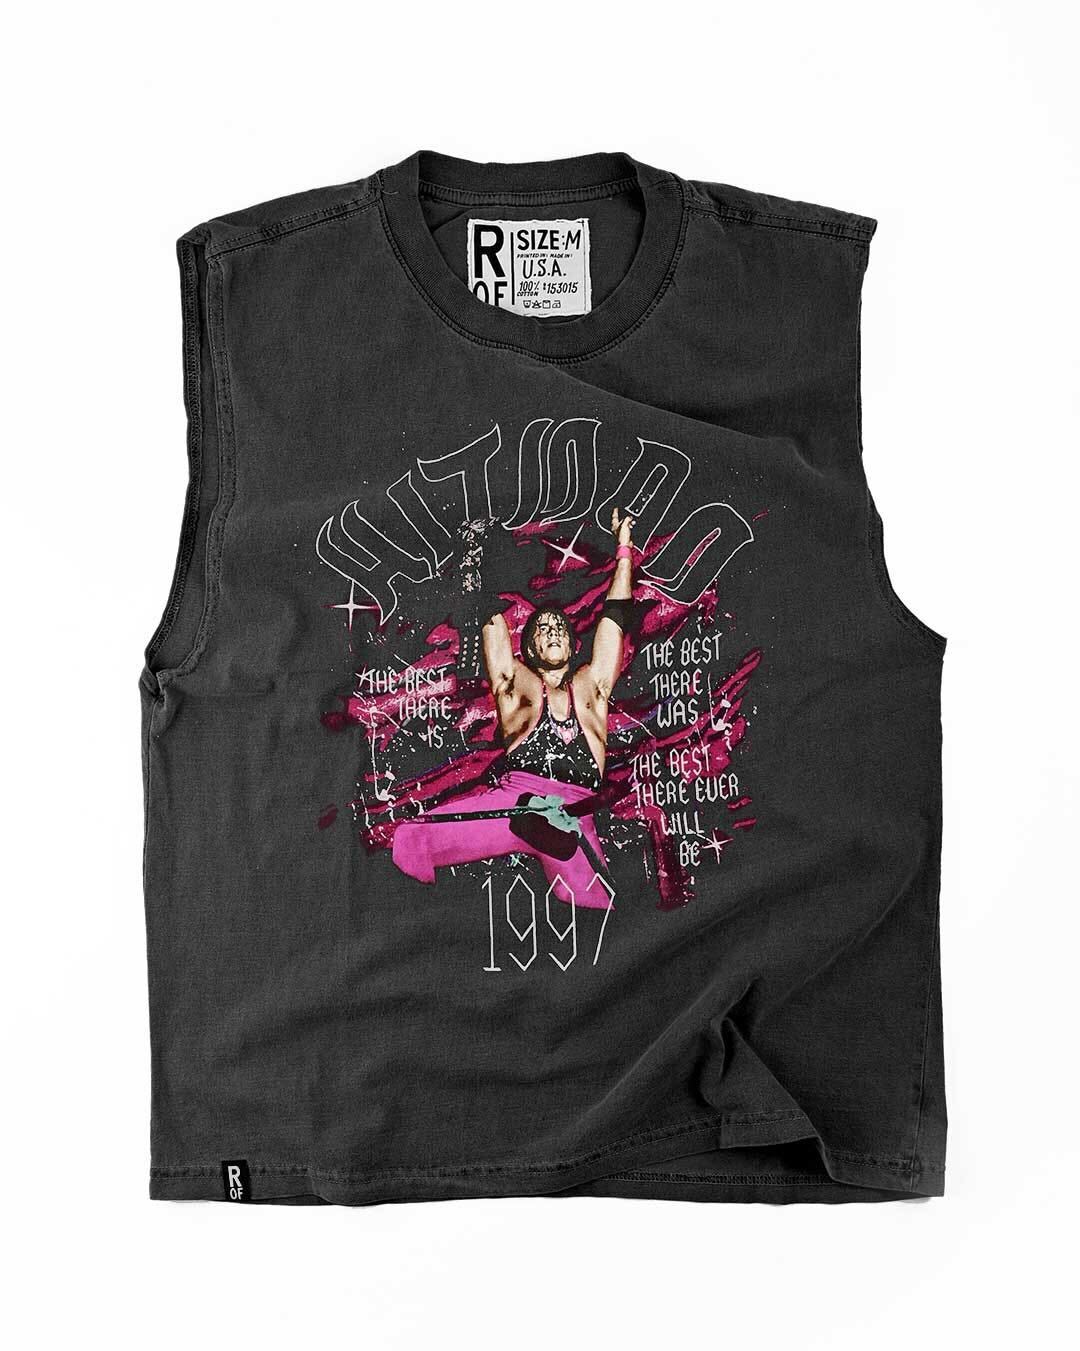 Bret Hart Hitman Black Muscle Tee - Roots of Fight